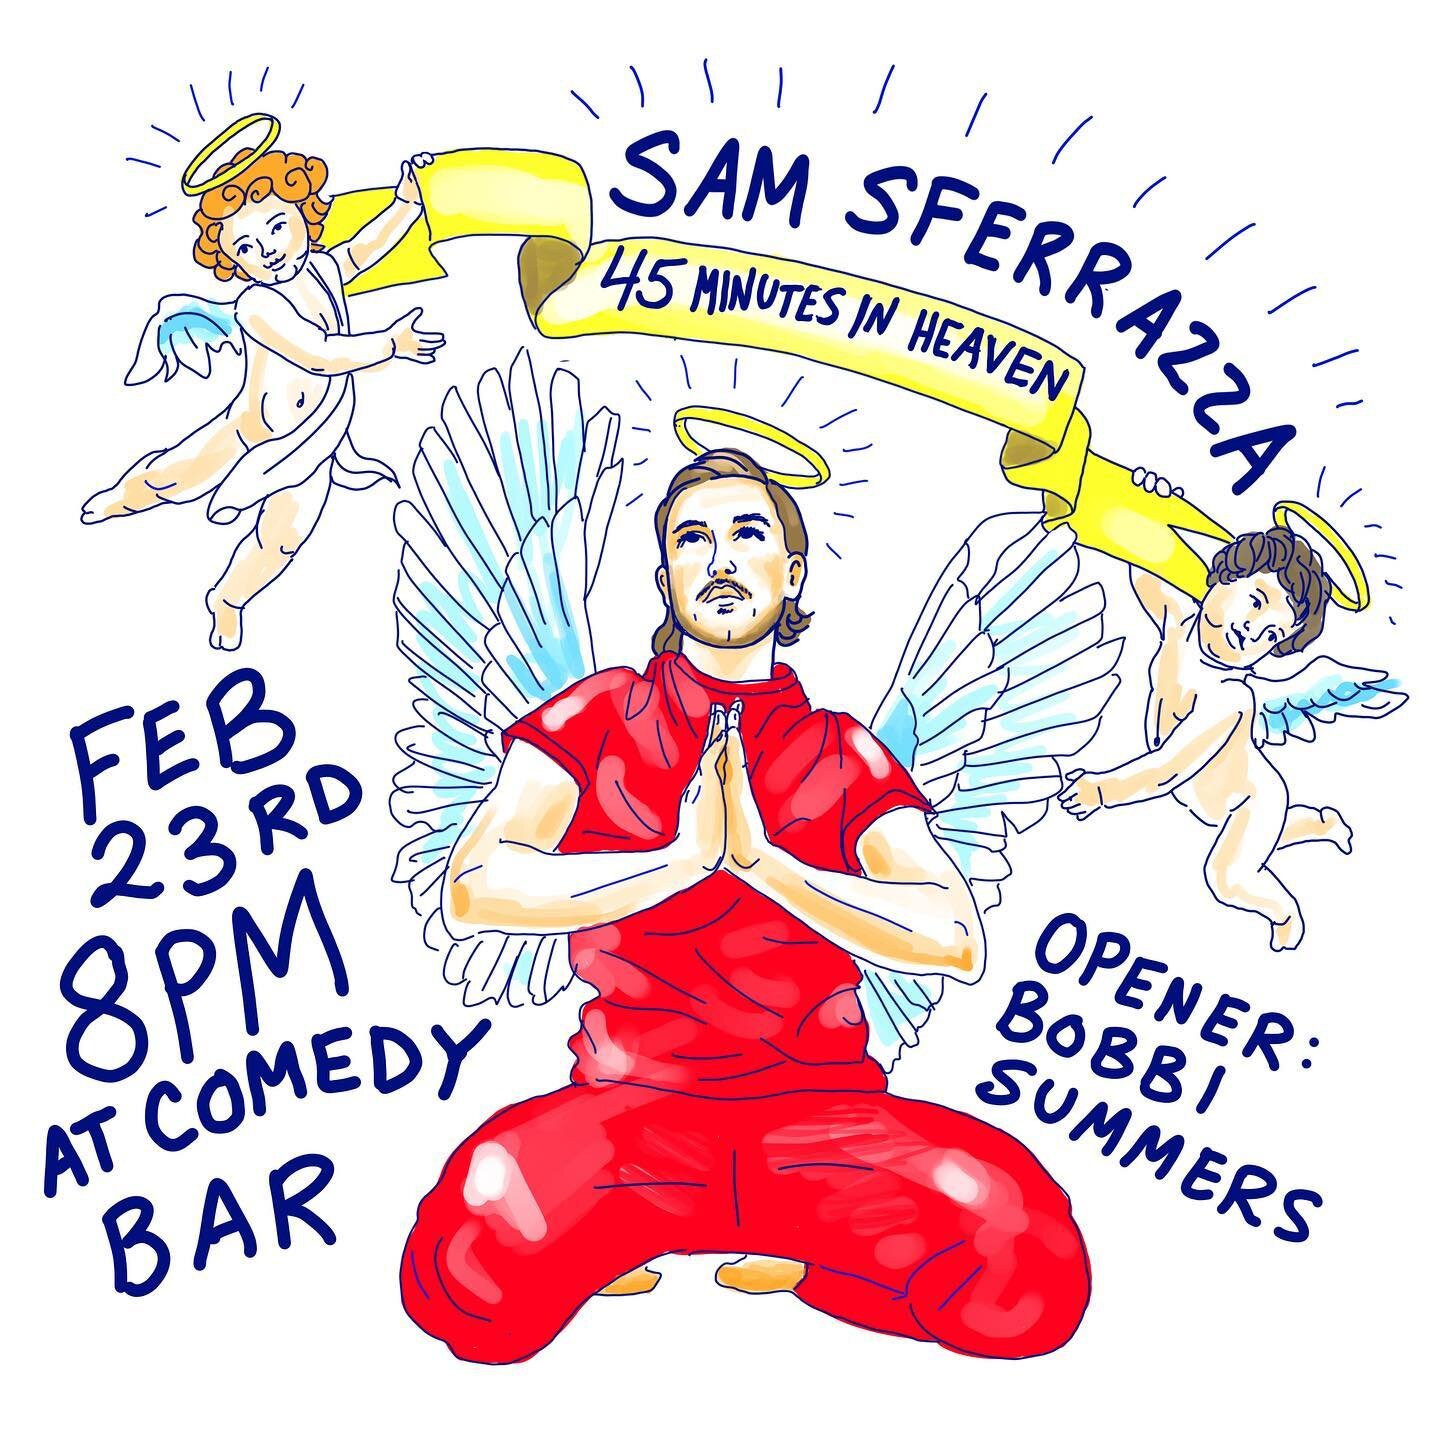 👼🏼🚨CALLING ALL ANGELS🚨👼🏼 For one night only Heaven is a place on Earth. For I will be doing my first 45 minute set at Comedy Bar next month. So excited to bring on the incomparable @bobbi_channel as my opener. What material will I be doing? I l